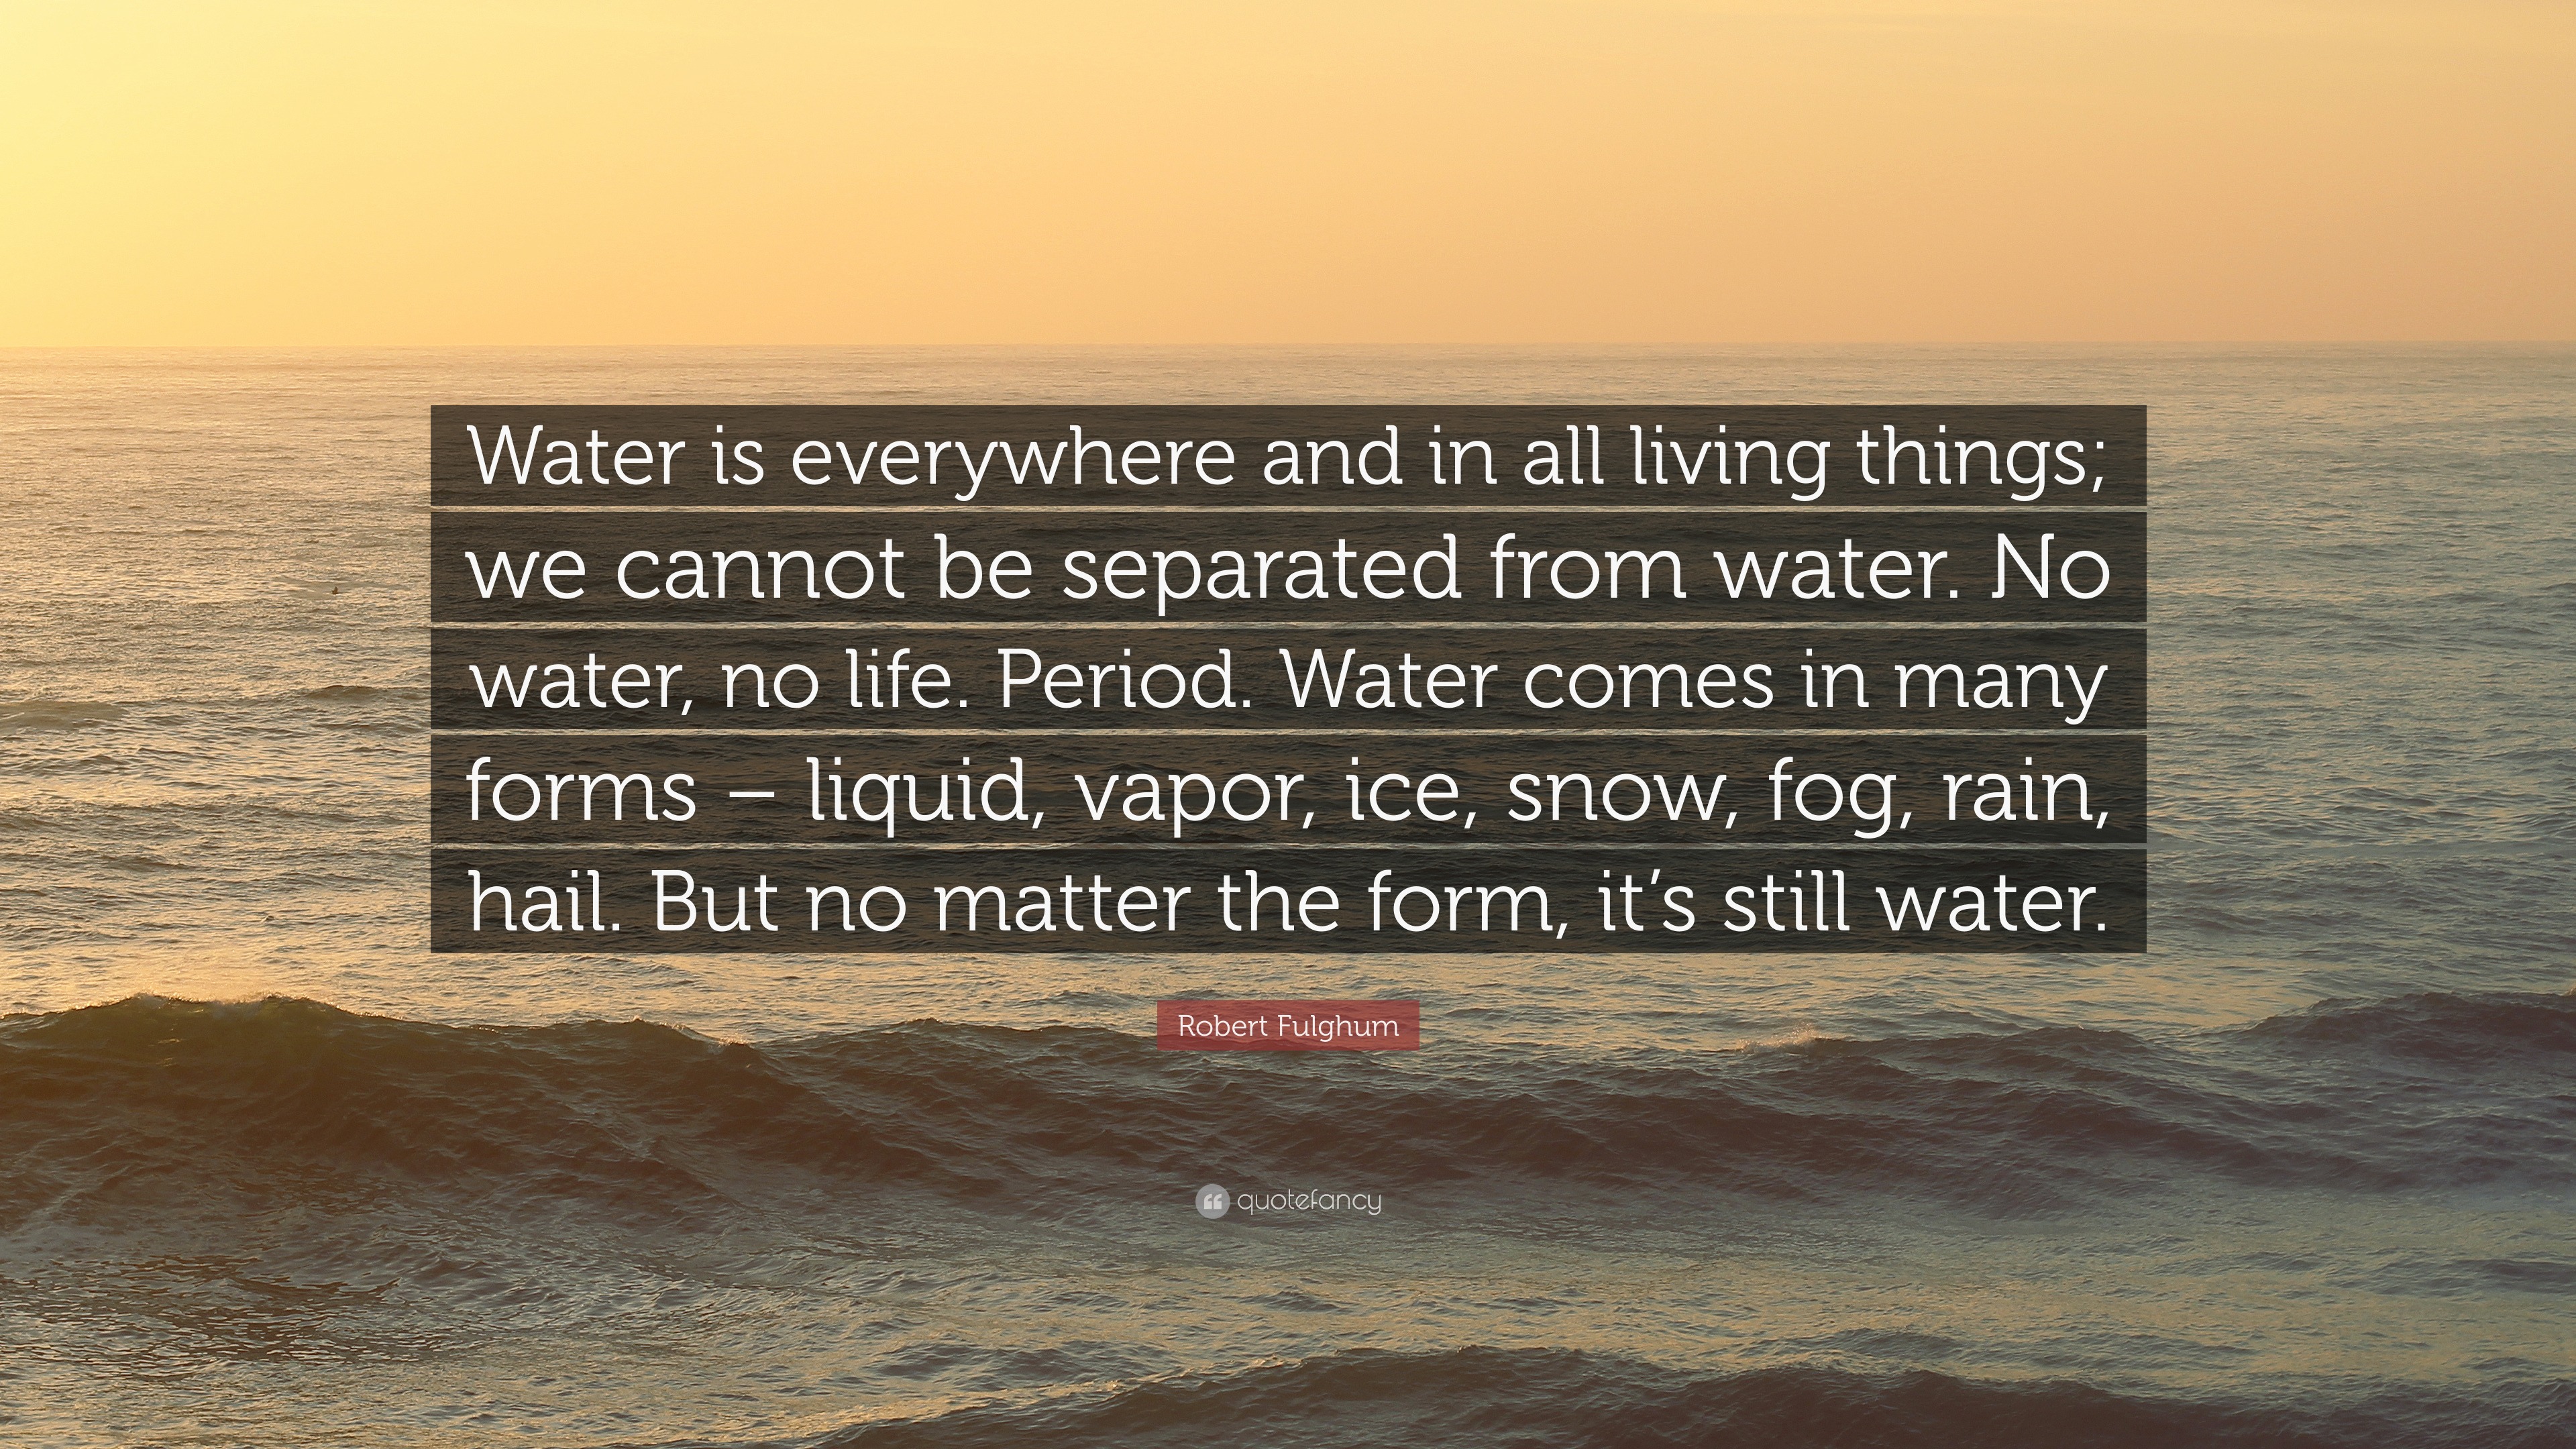 Water: The Source of All Life –